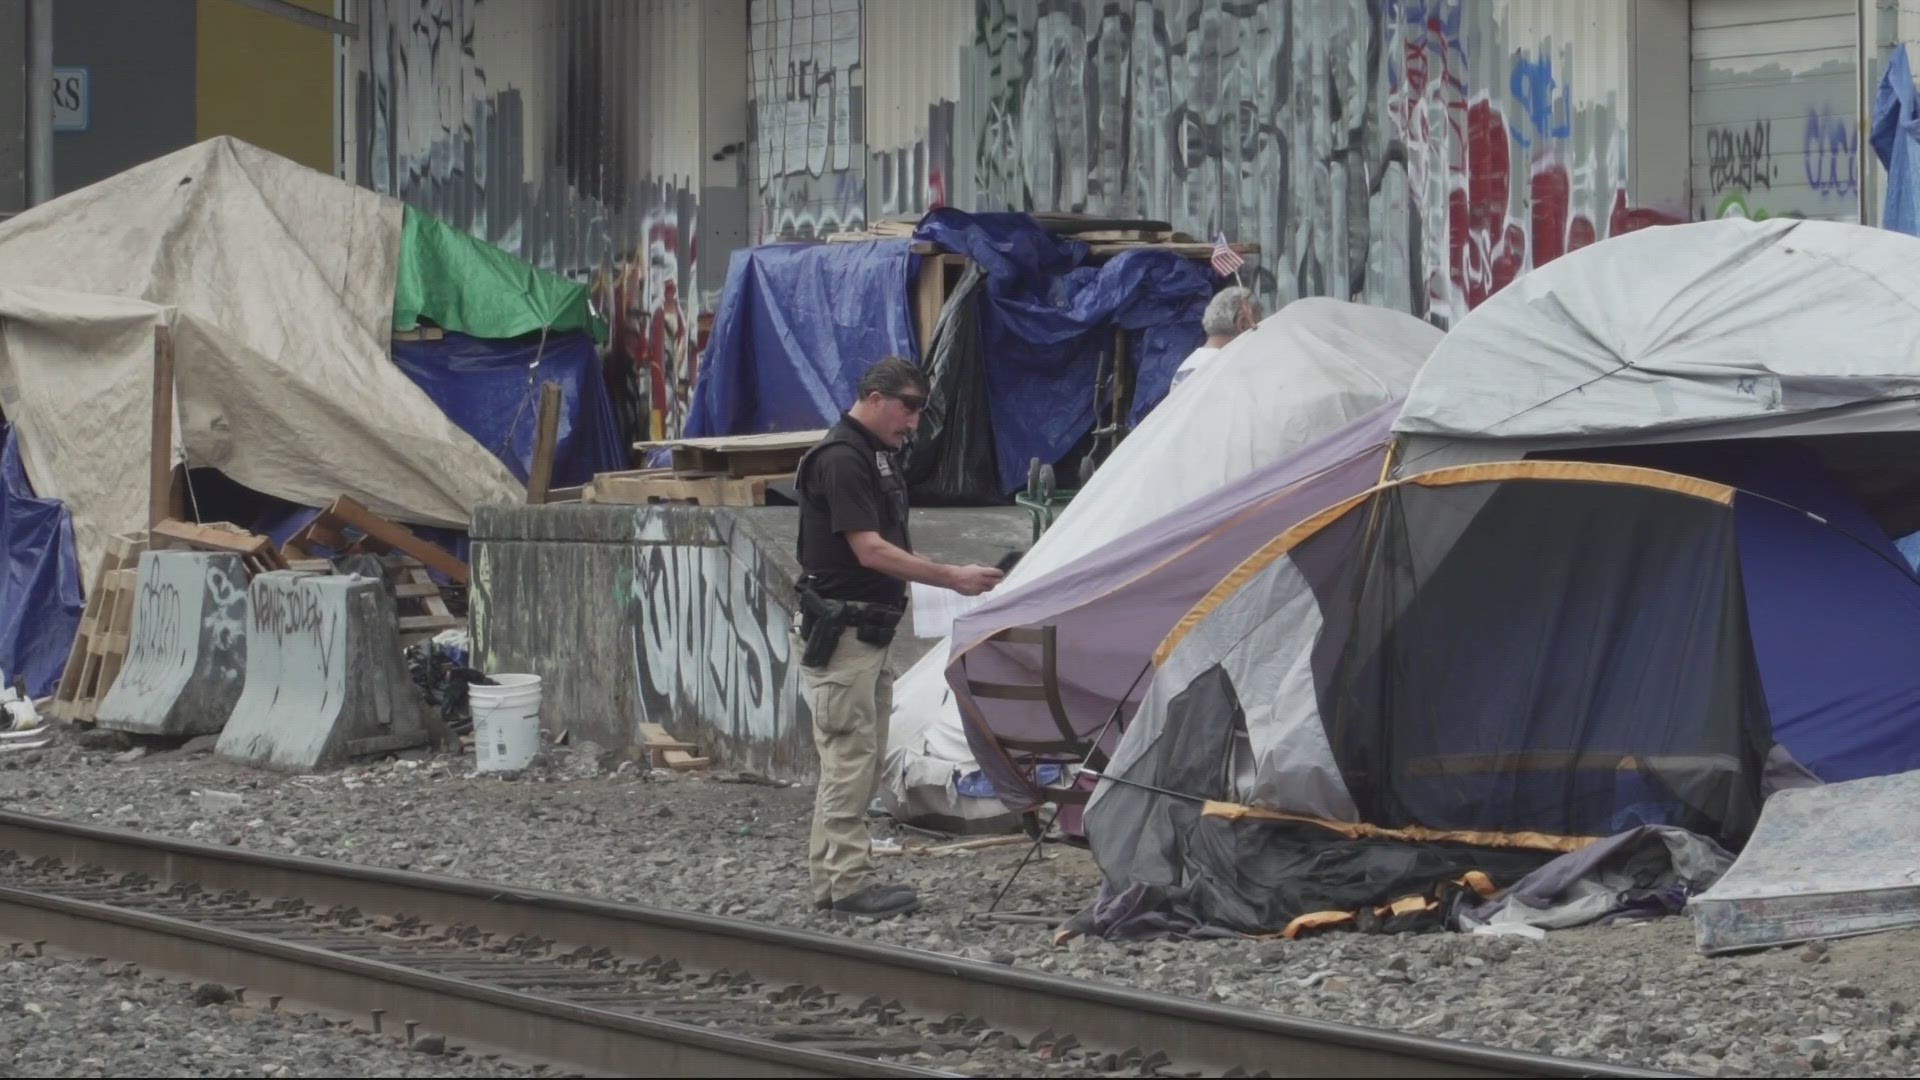 Residents camped near the railroad tracks said the area feels secluded and safe, despite the noise from passing trains